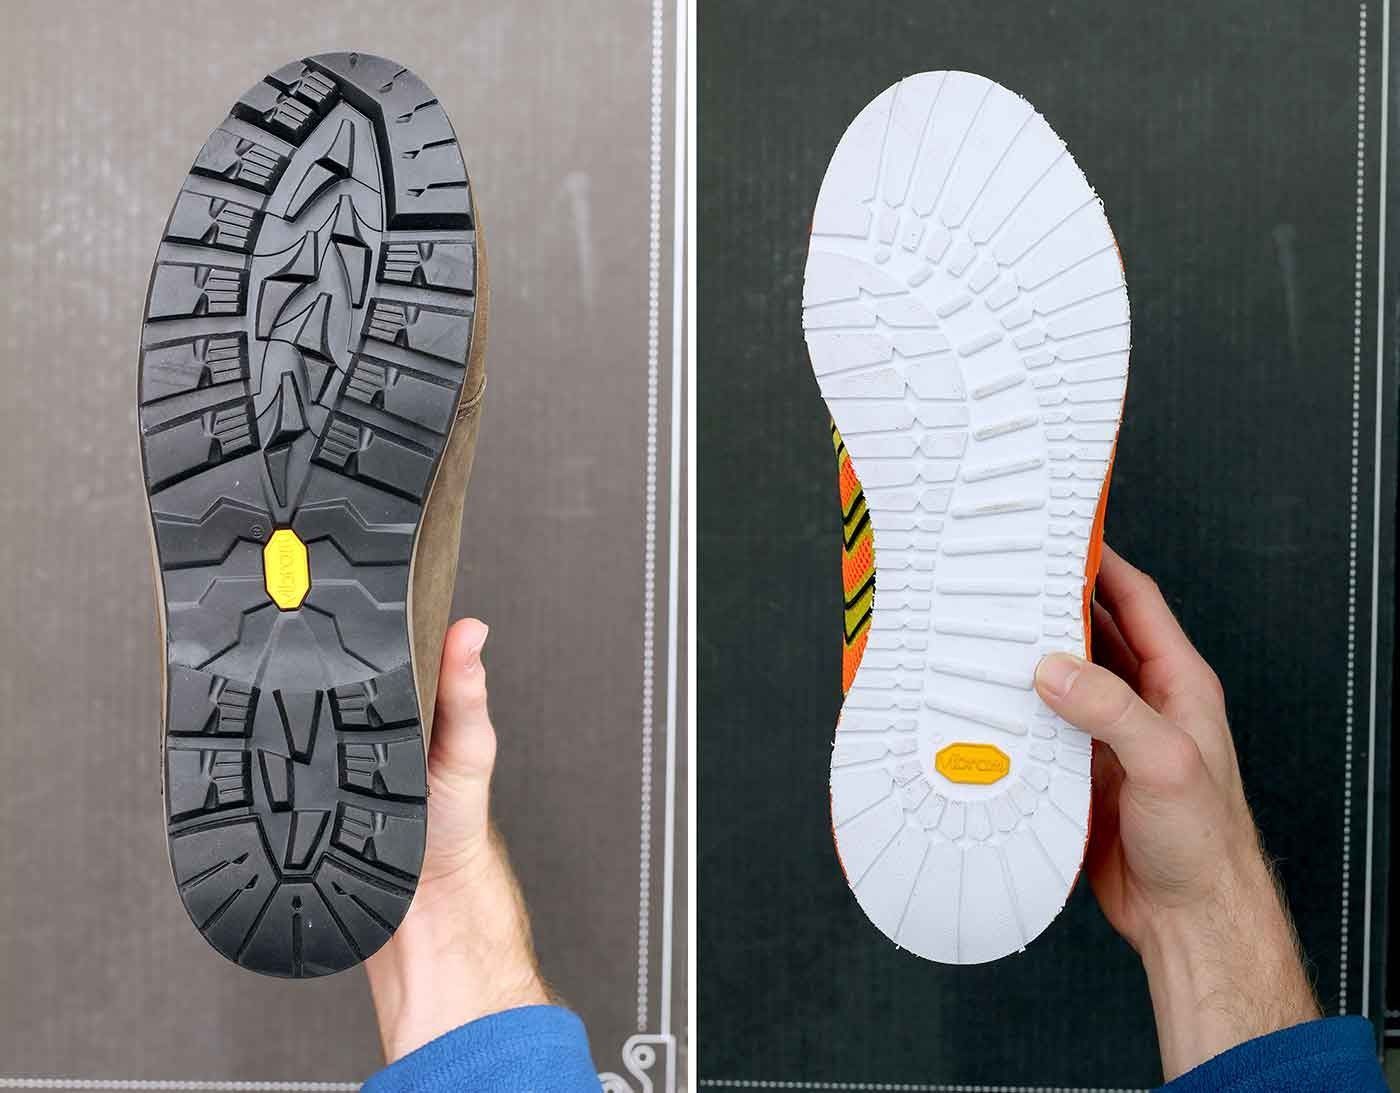 Soulful soles: Vibram offers colorful 